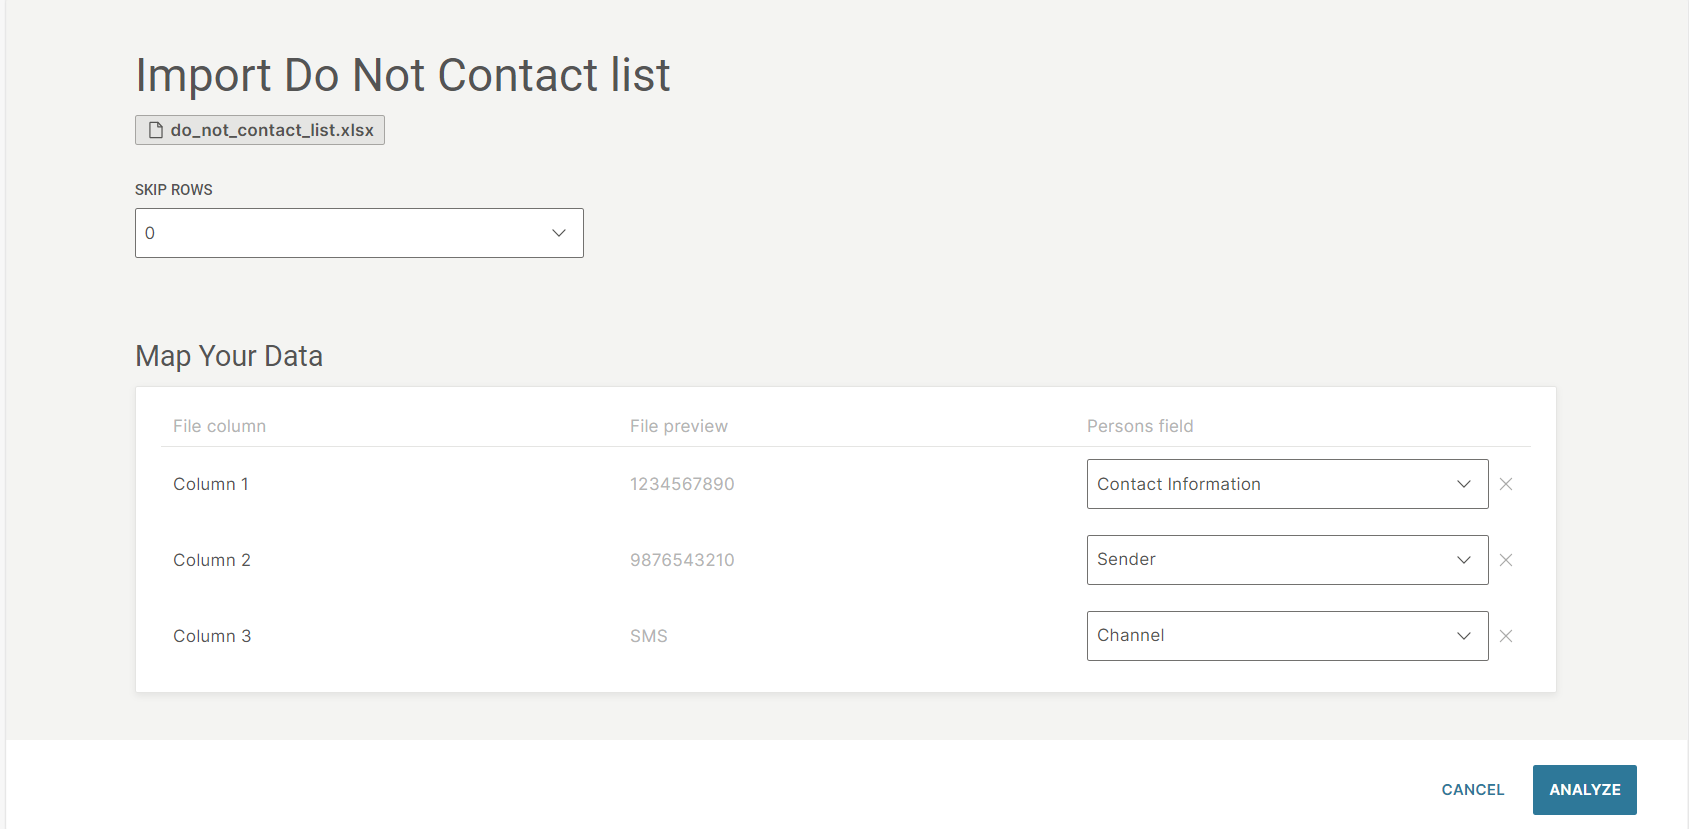 Import the Do not contact list